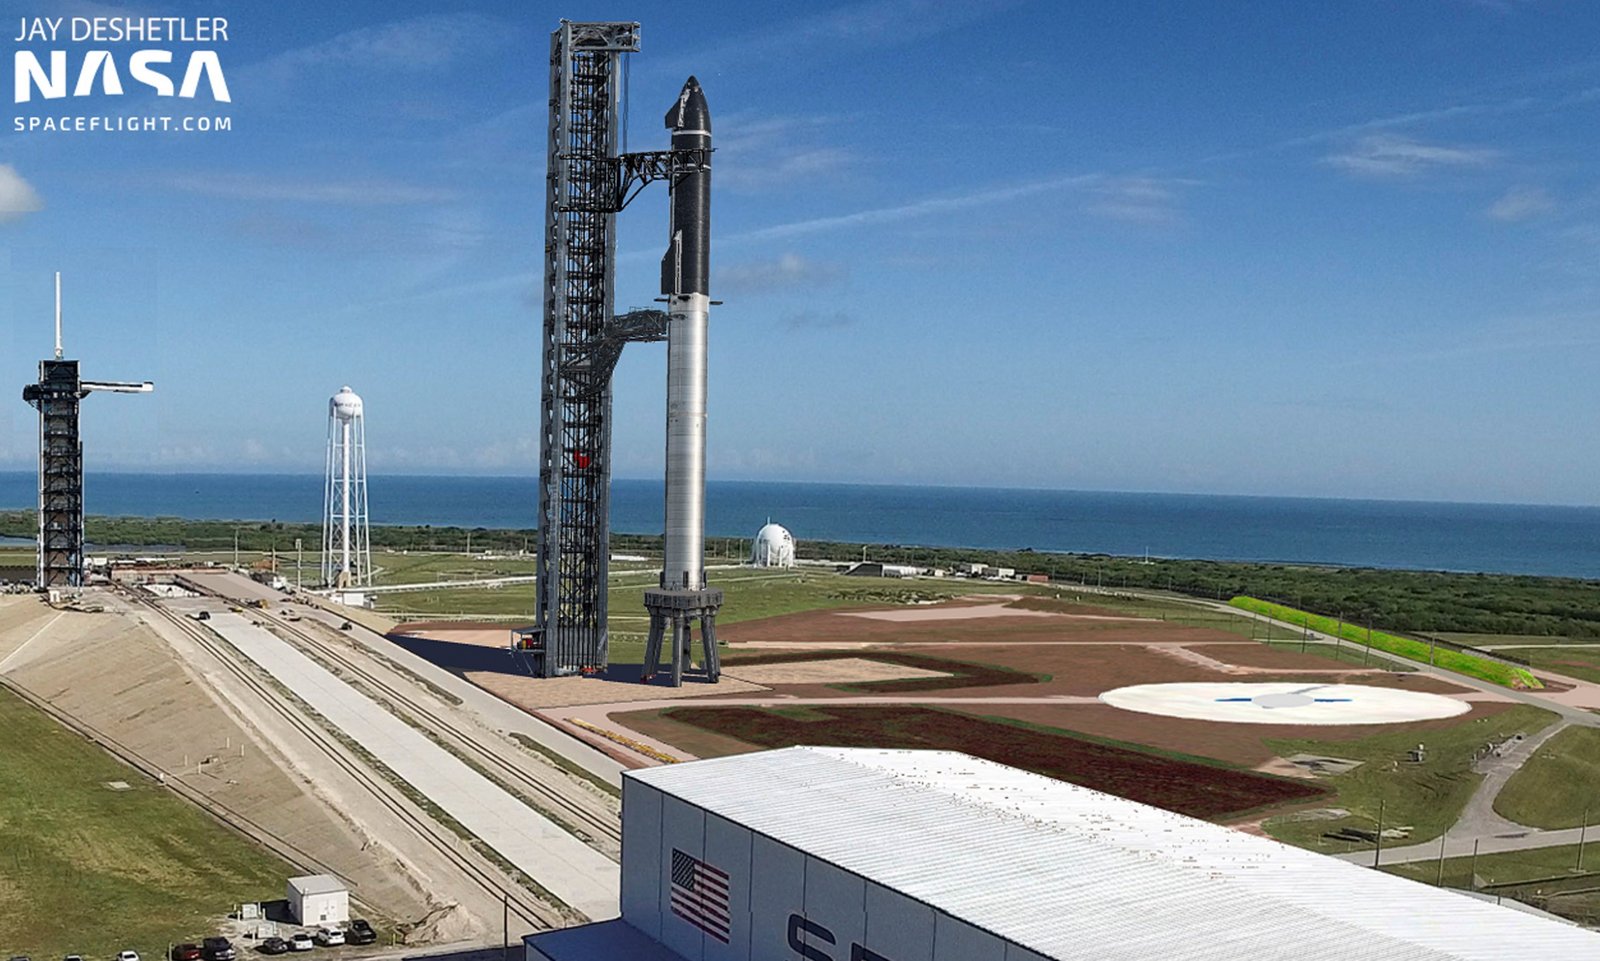 SpaceX has slowly but surely begun the process of building Starship’s first Florida launch pad